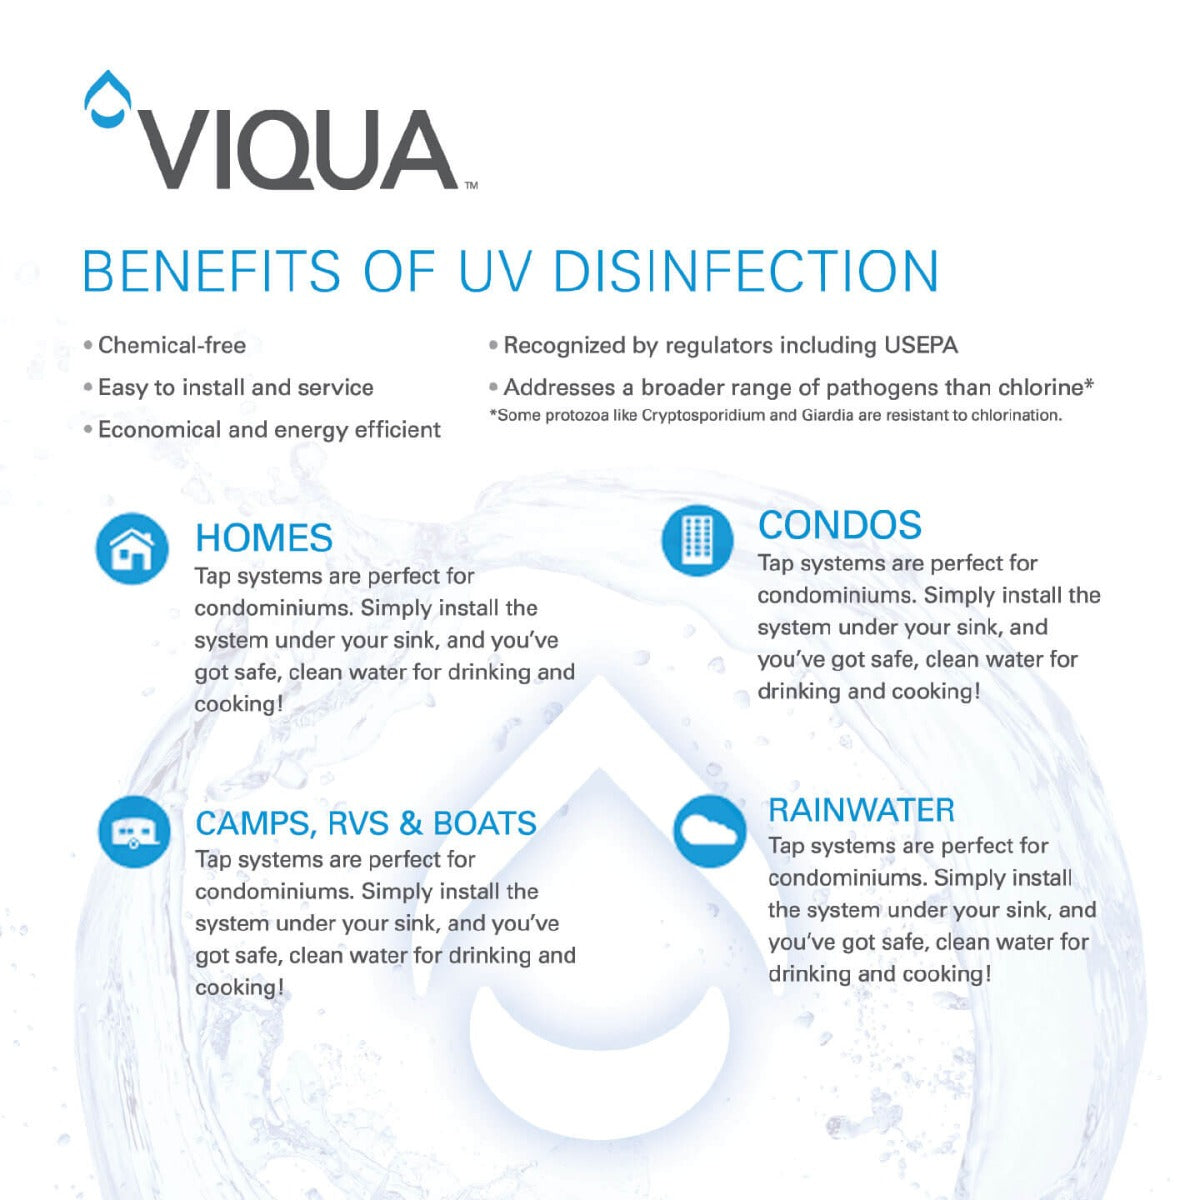 S810RL Water Disinfection System UV Lamp by Viqua